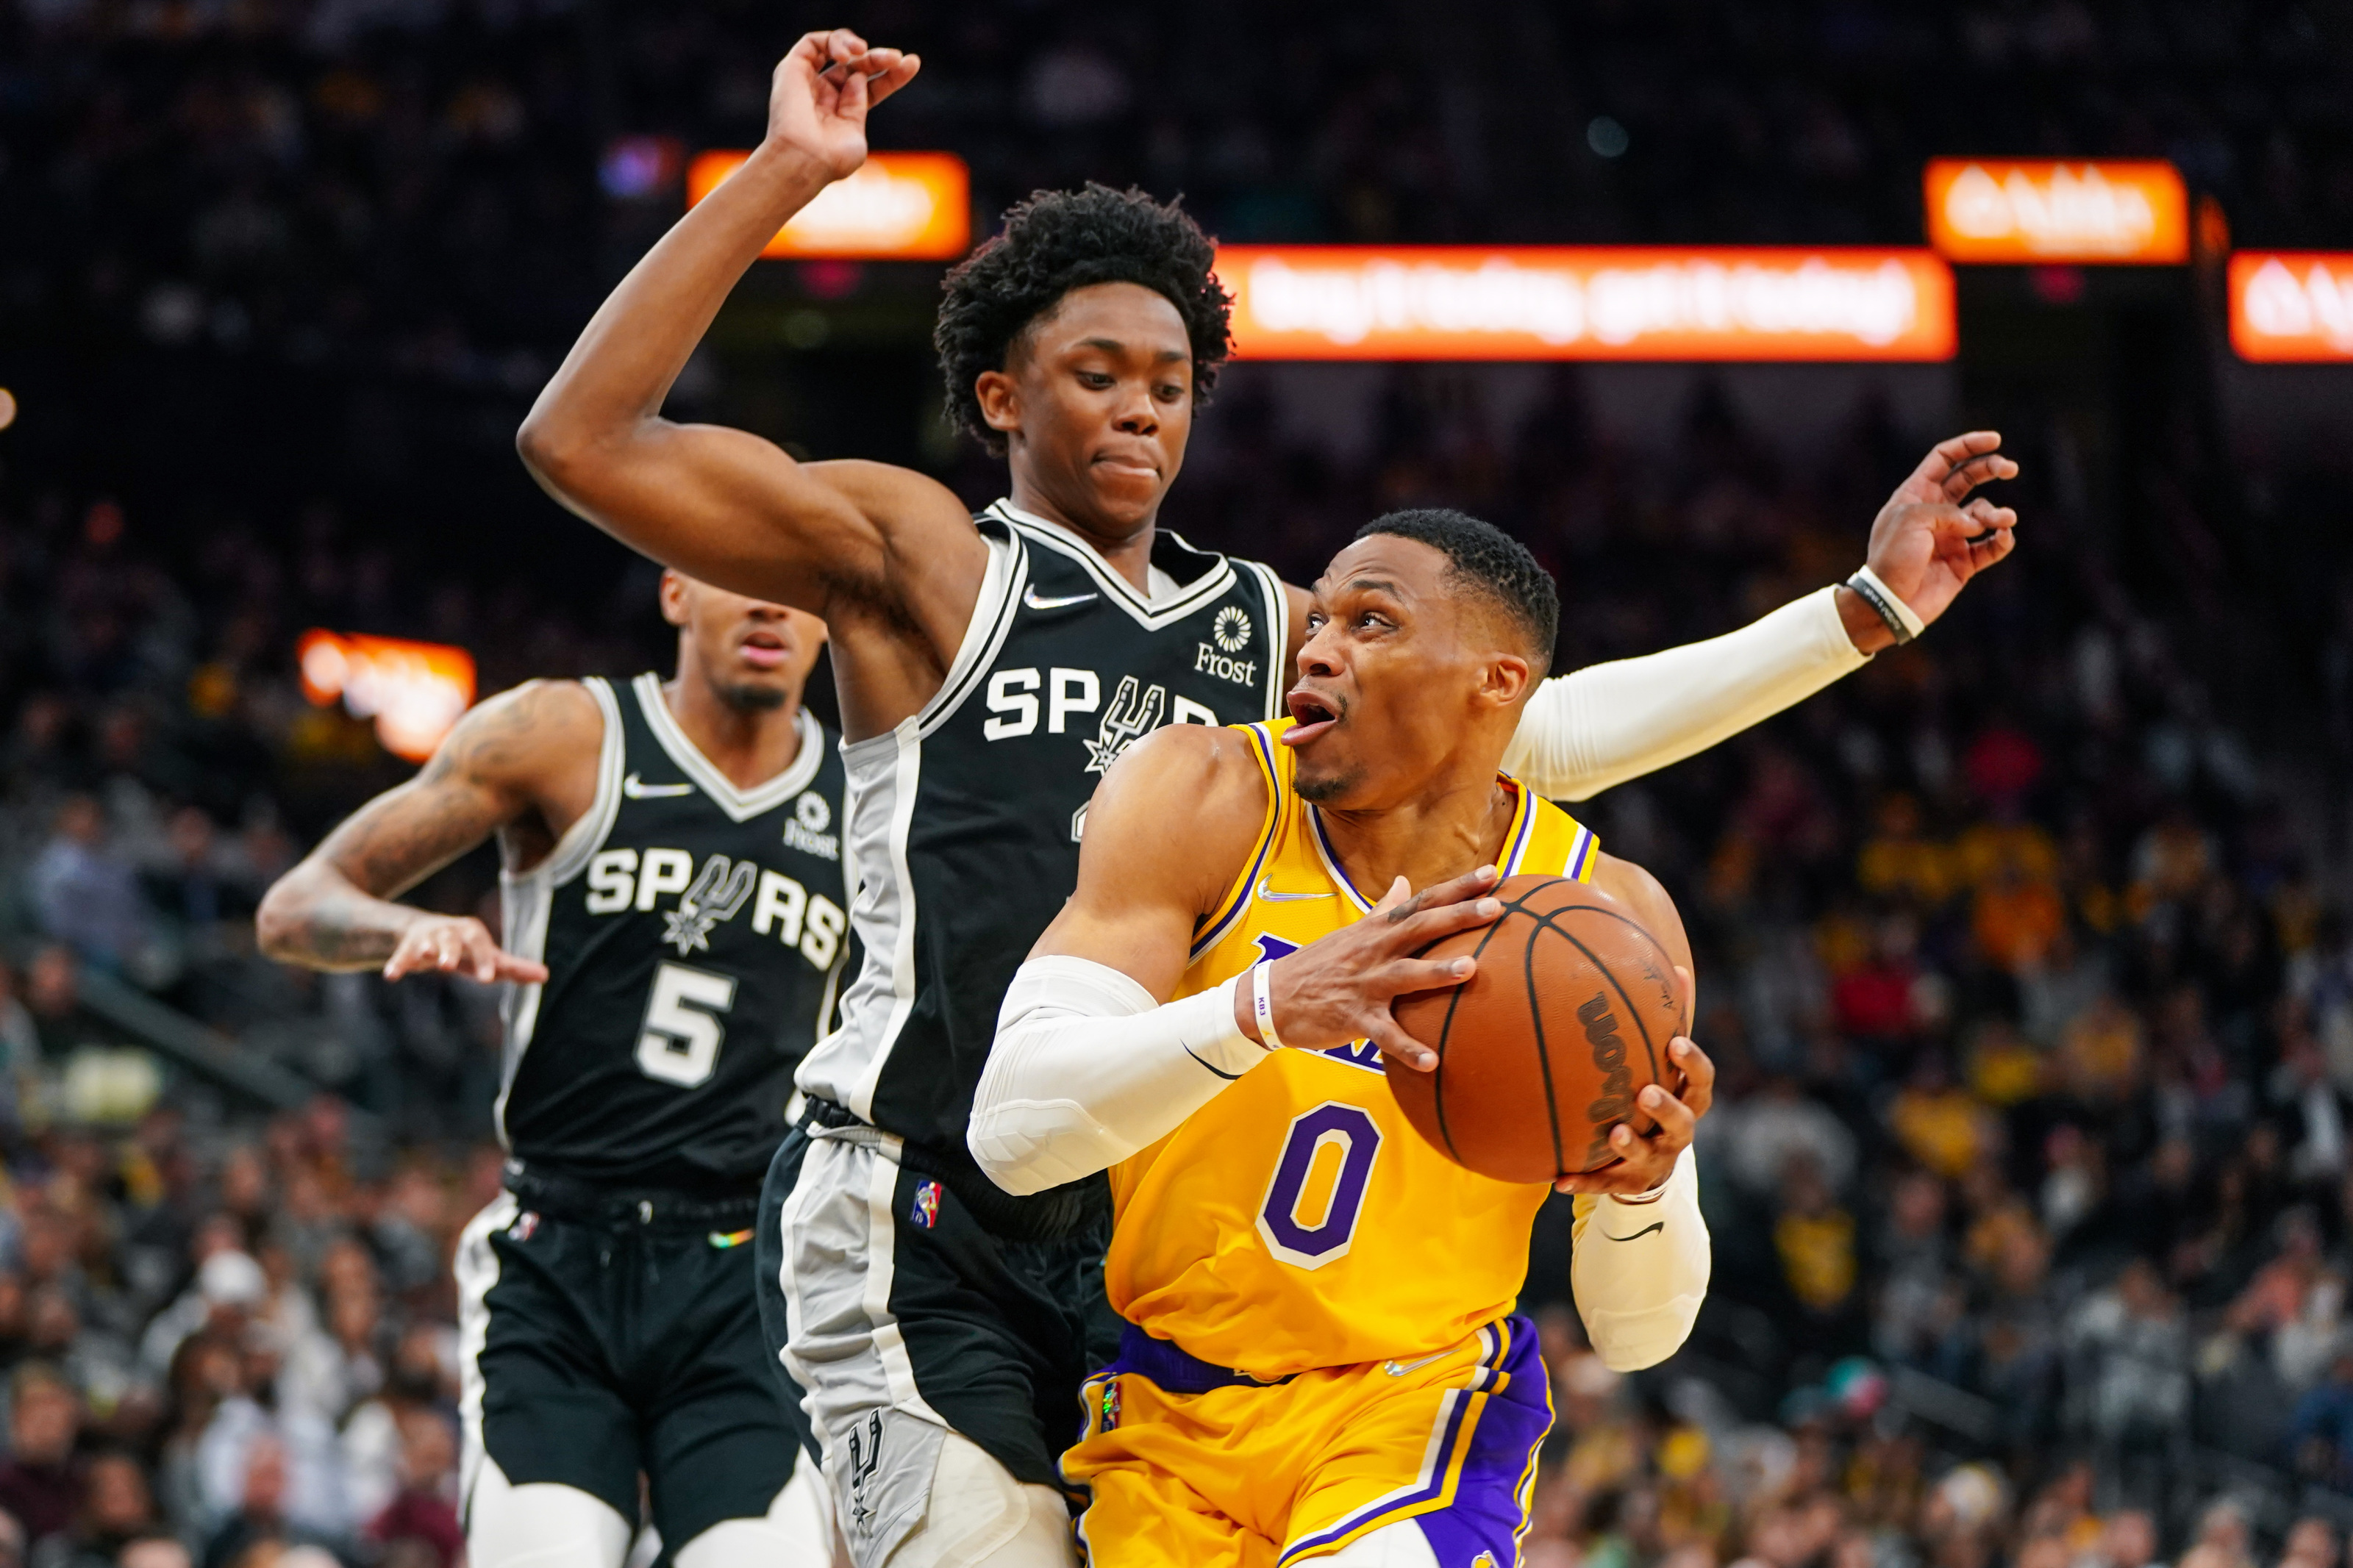 Lakers vs Hawks: Russell Westbrook is getting outshined by